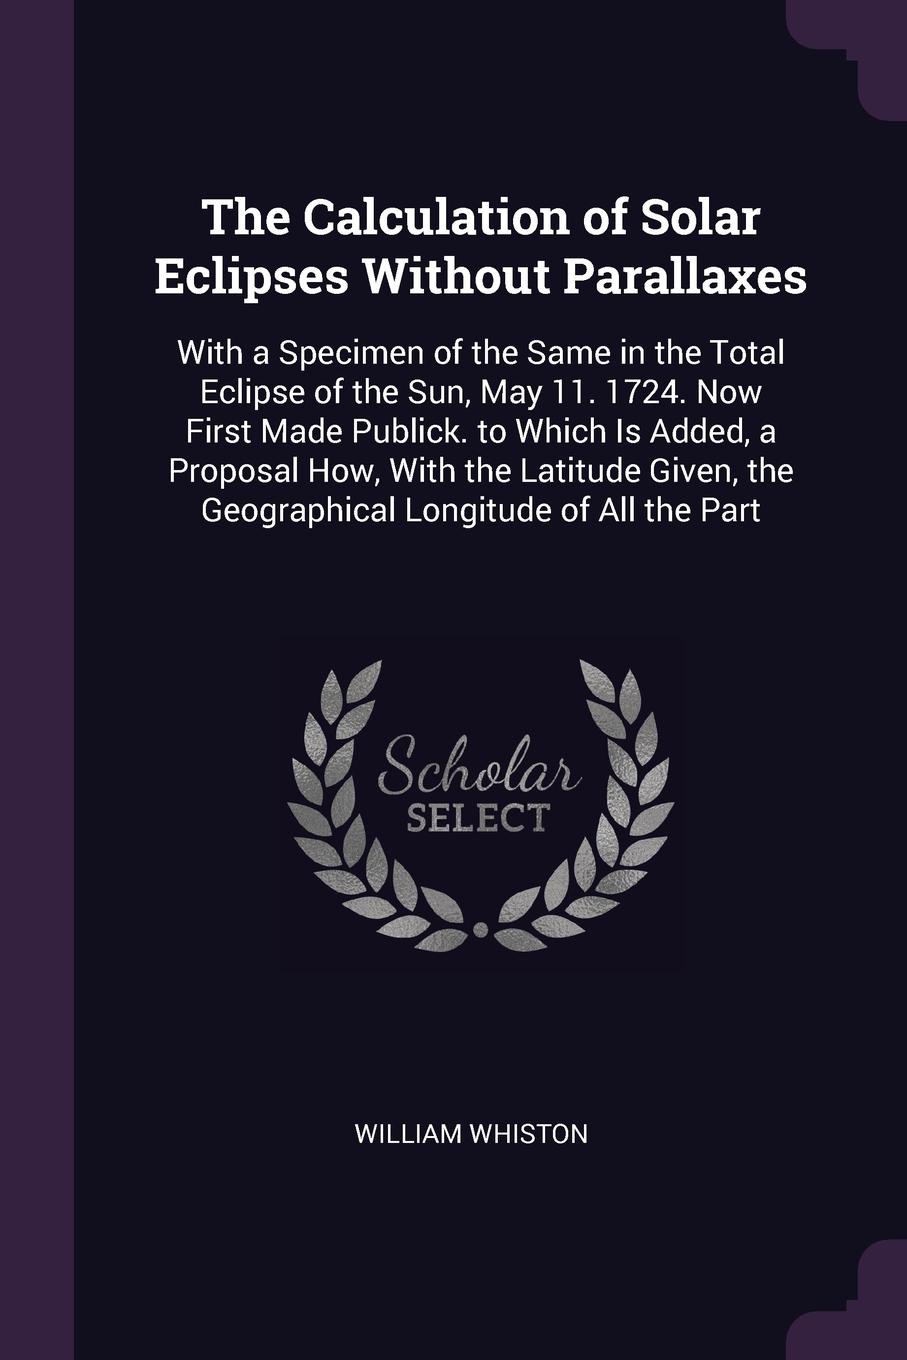 The Calculation of Solar Eclipses Without Parallaxes. With a Specimen of the Same in the Total Eclipse of the Sun, May 11. 1724. Now First Made Publick. to Which Is Added, a Proposal How, With the Latitude Given, the Geographical Longitude of All ...